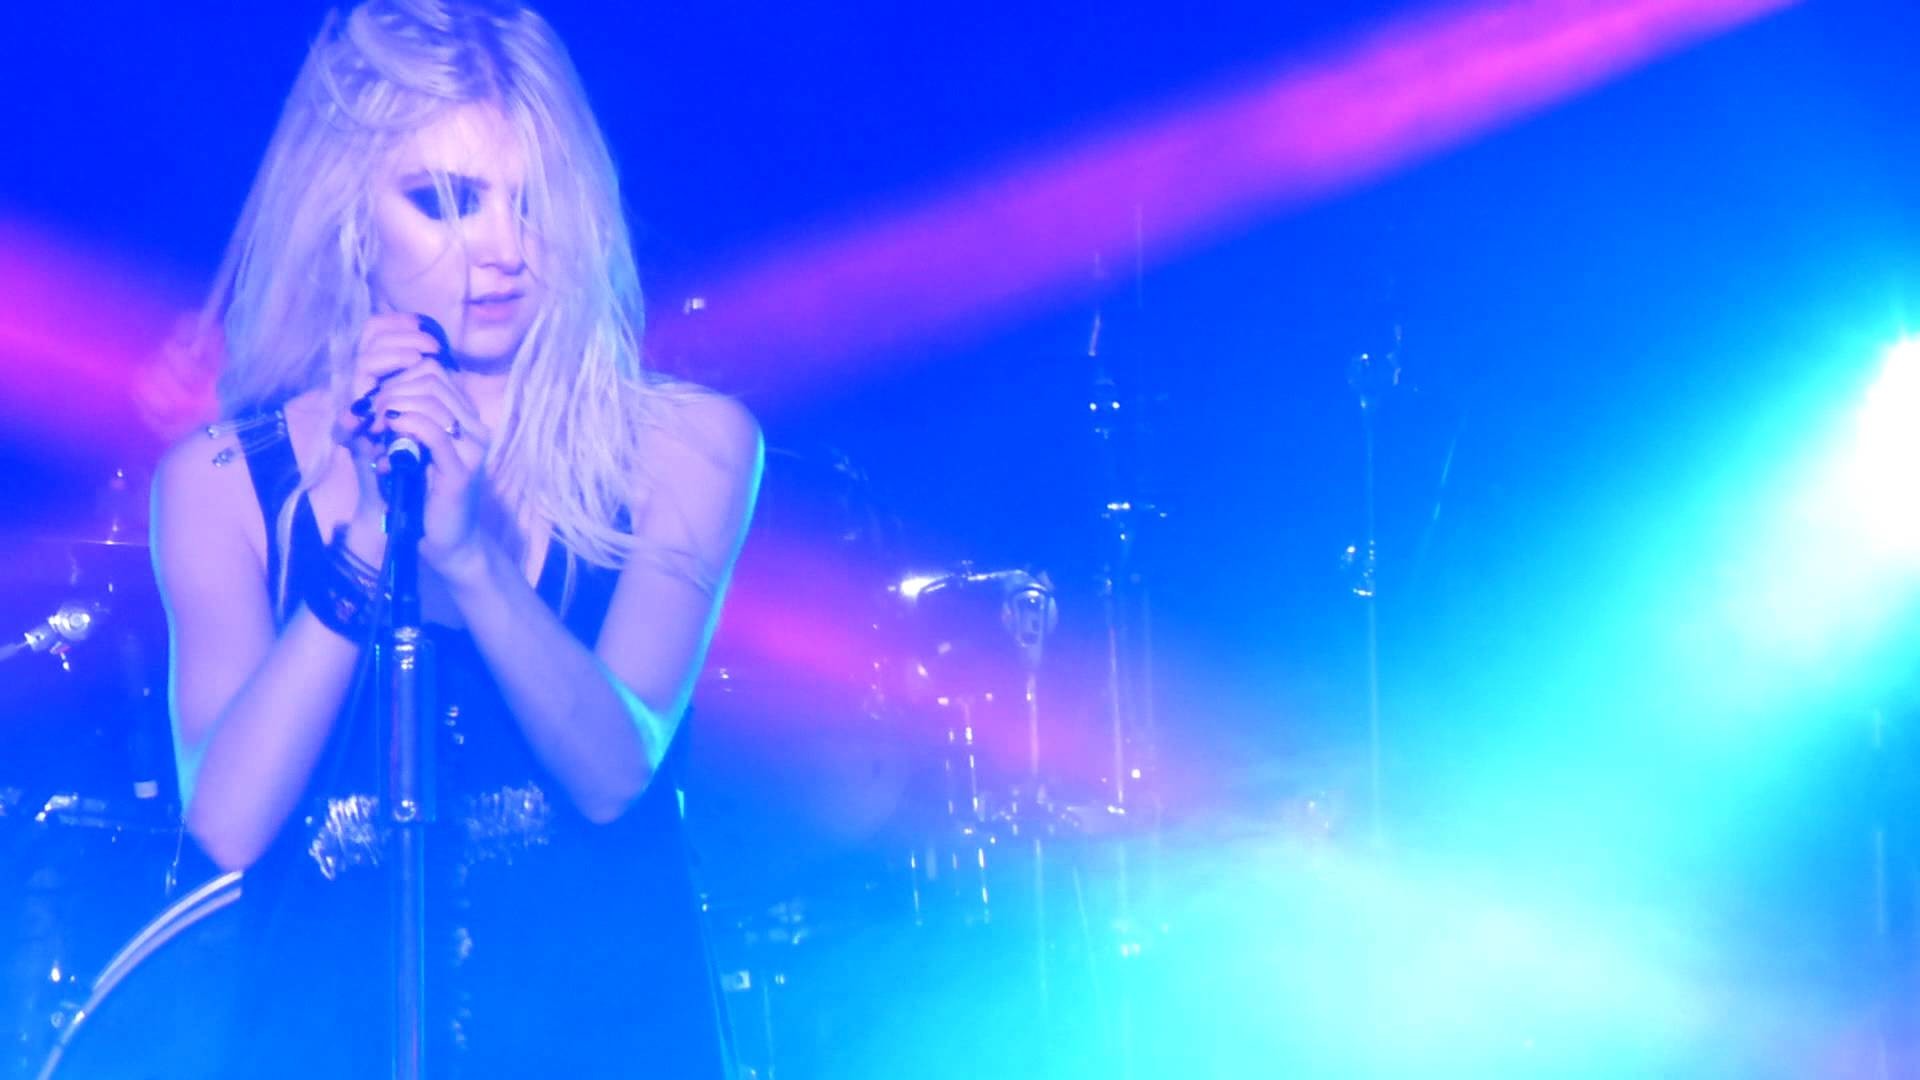 1920x1080 The Pretty Reckless (Taylor Momsen) - "Going to Hell" Live - Seattle, WA  (10-15-2013) - YouTube